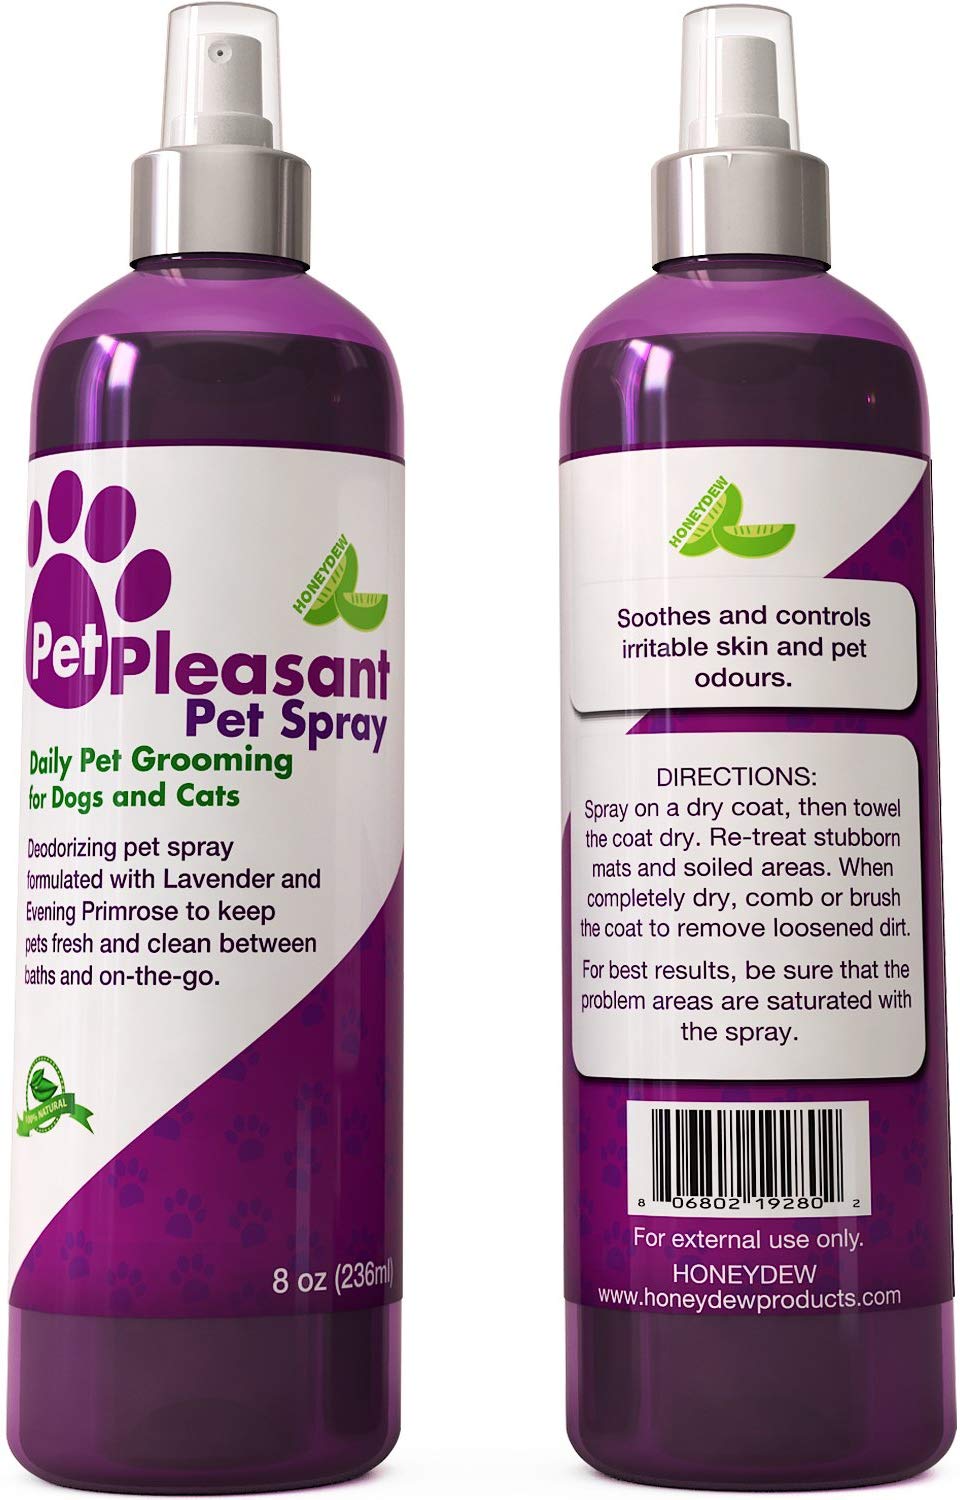 Honeydew Natural Pet Spray with Shampoo for Dogs and Cats